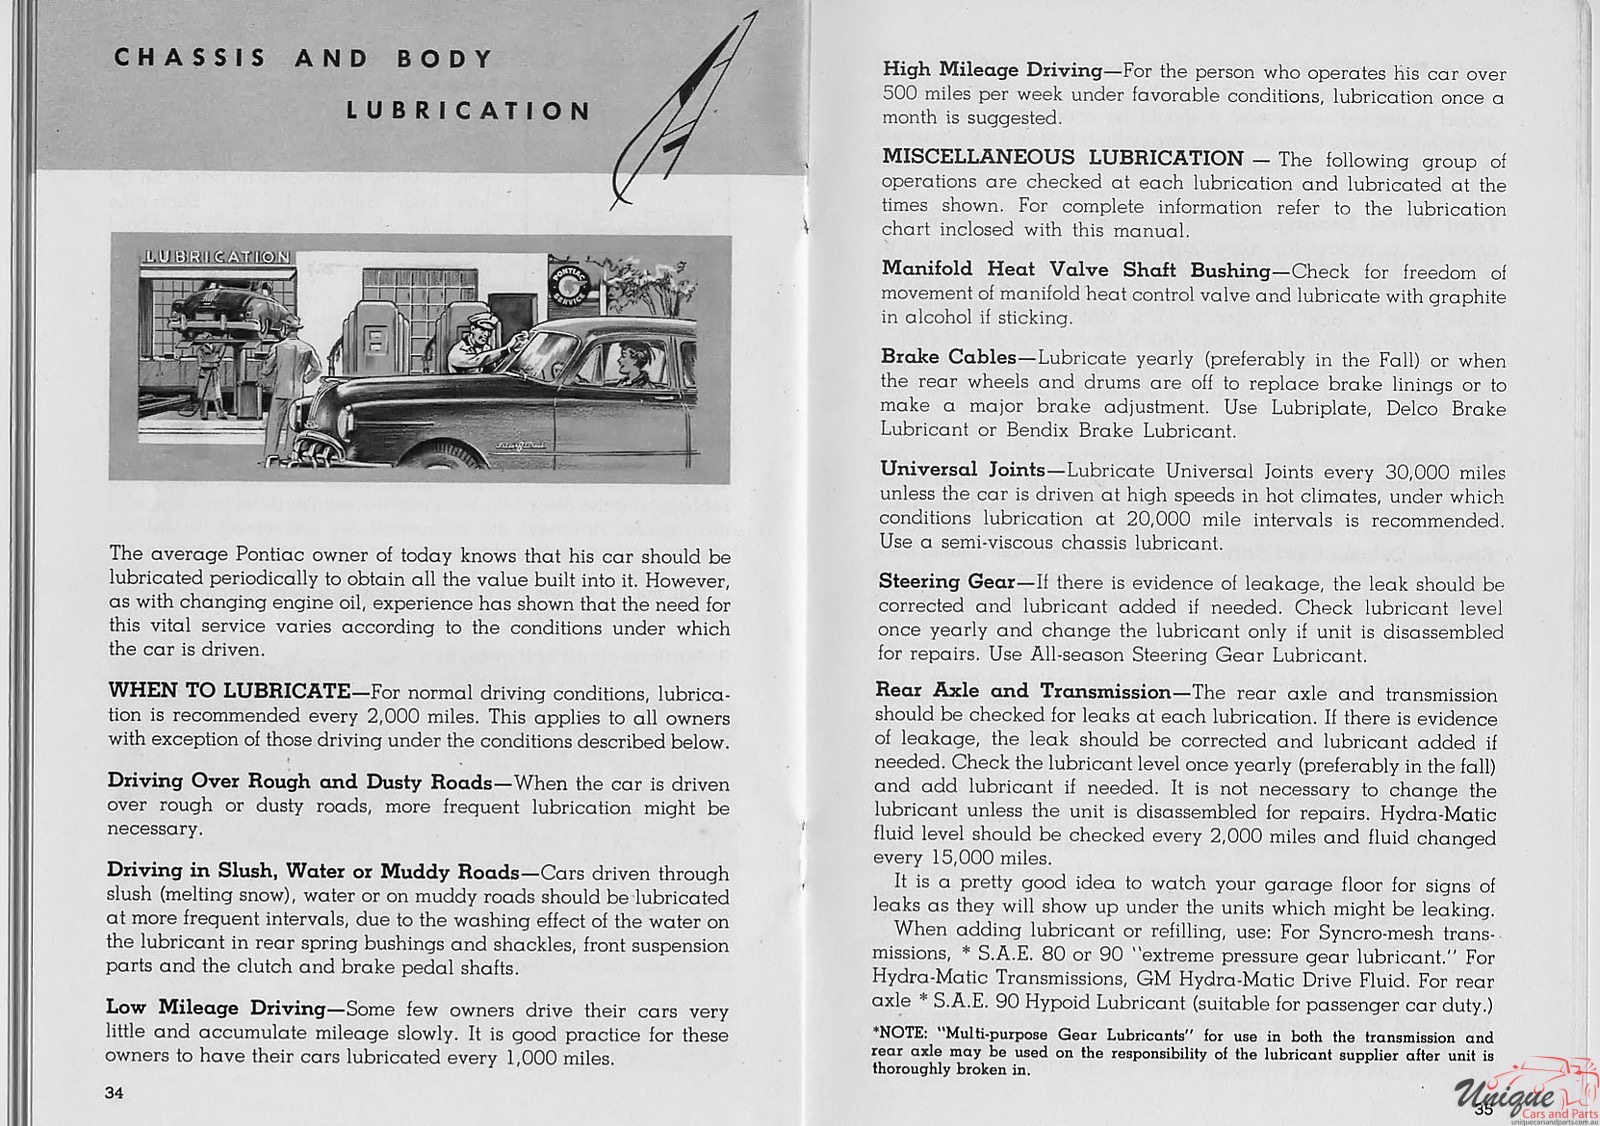 1950 Pontiac Owners Manual Page 23